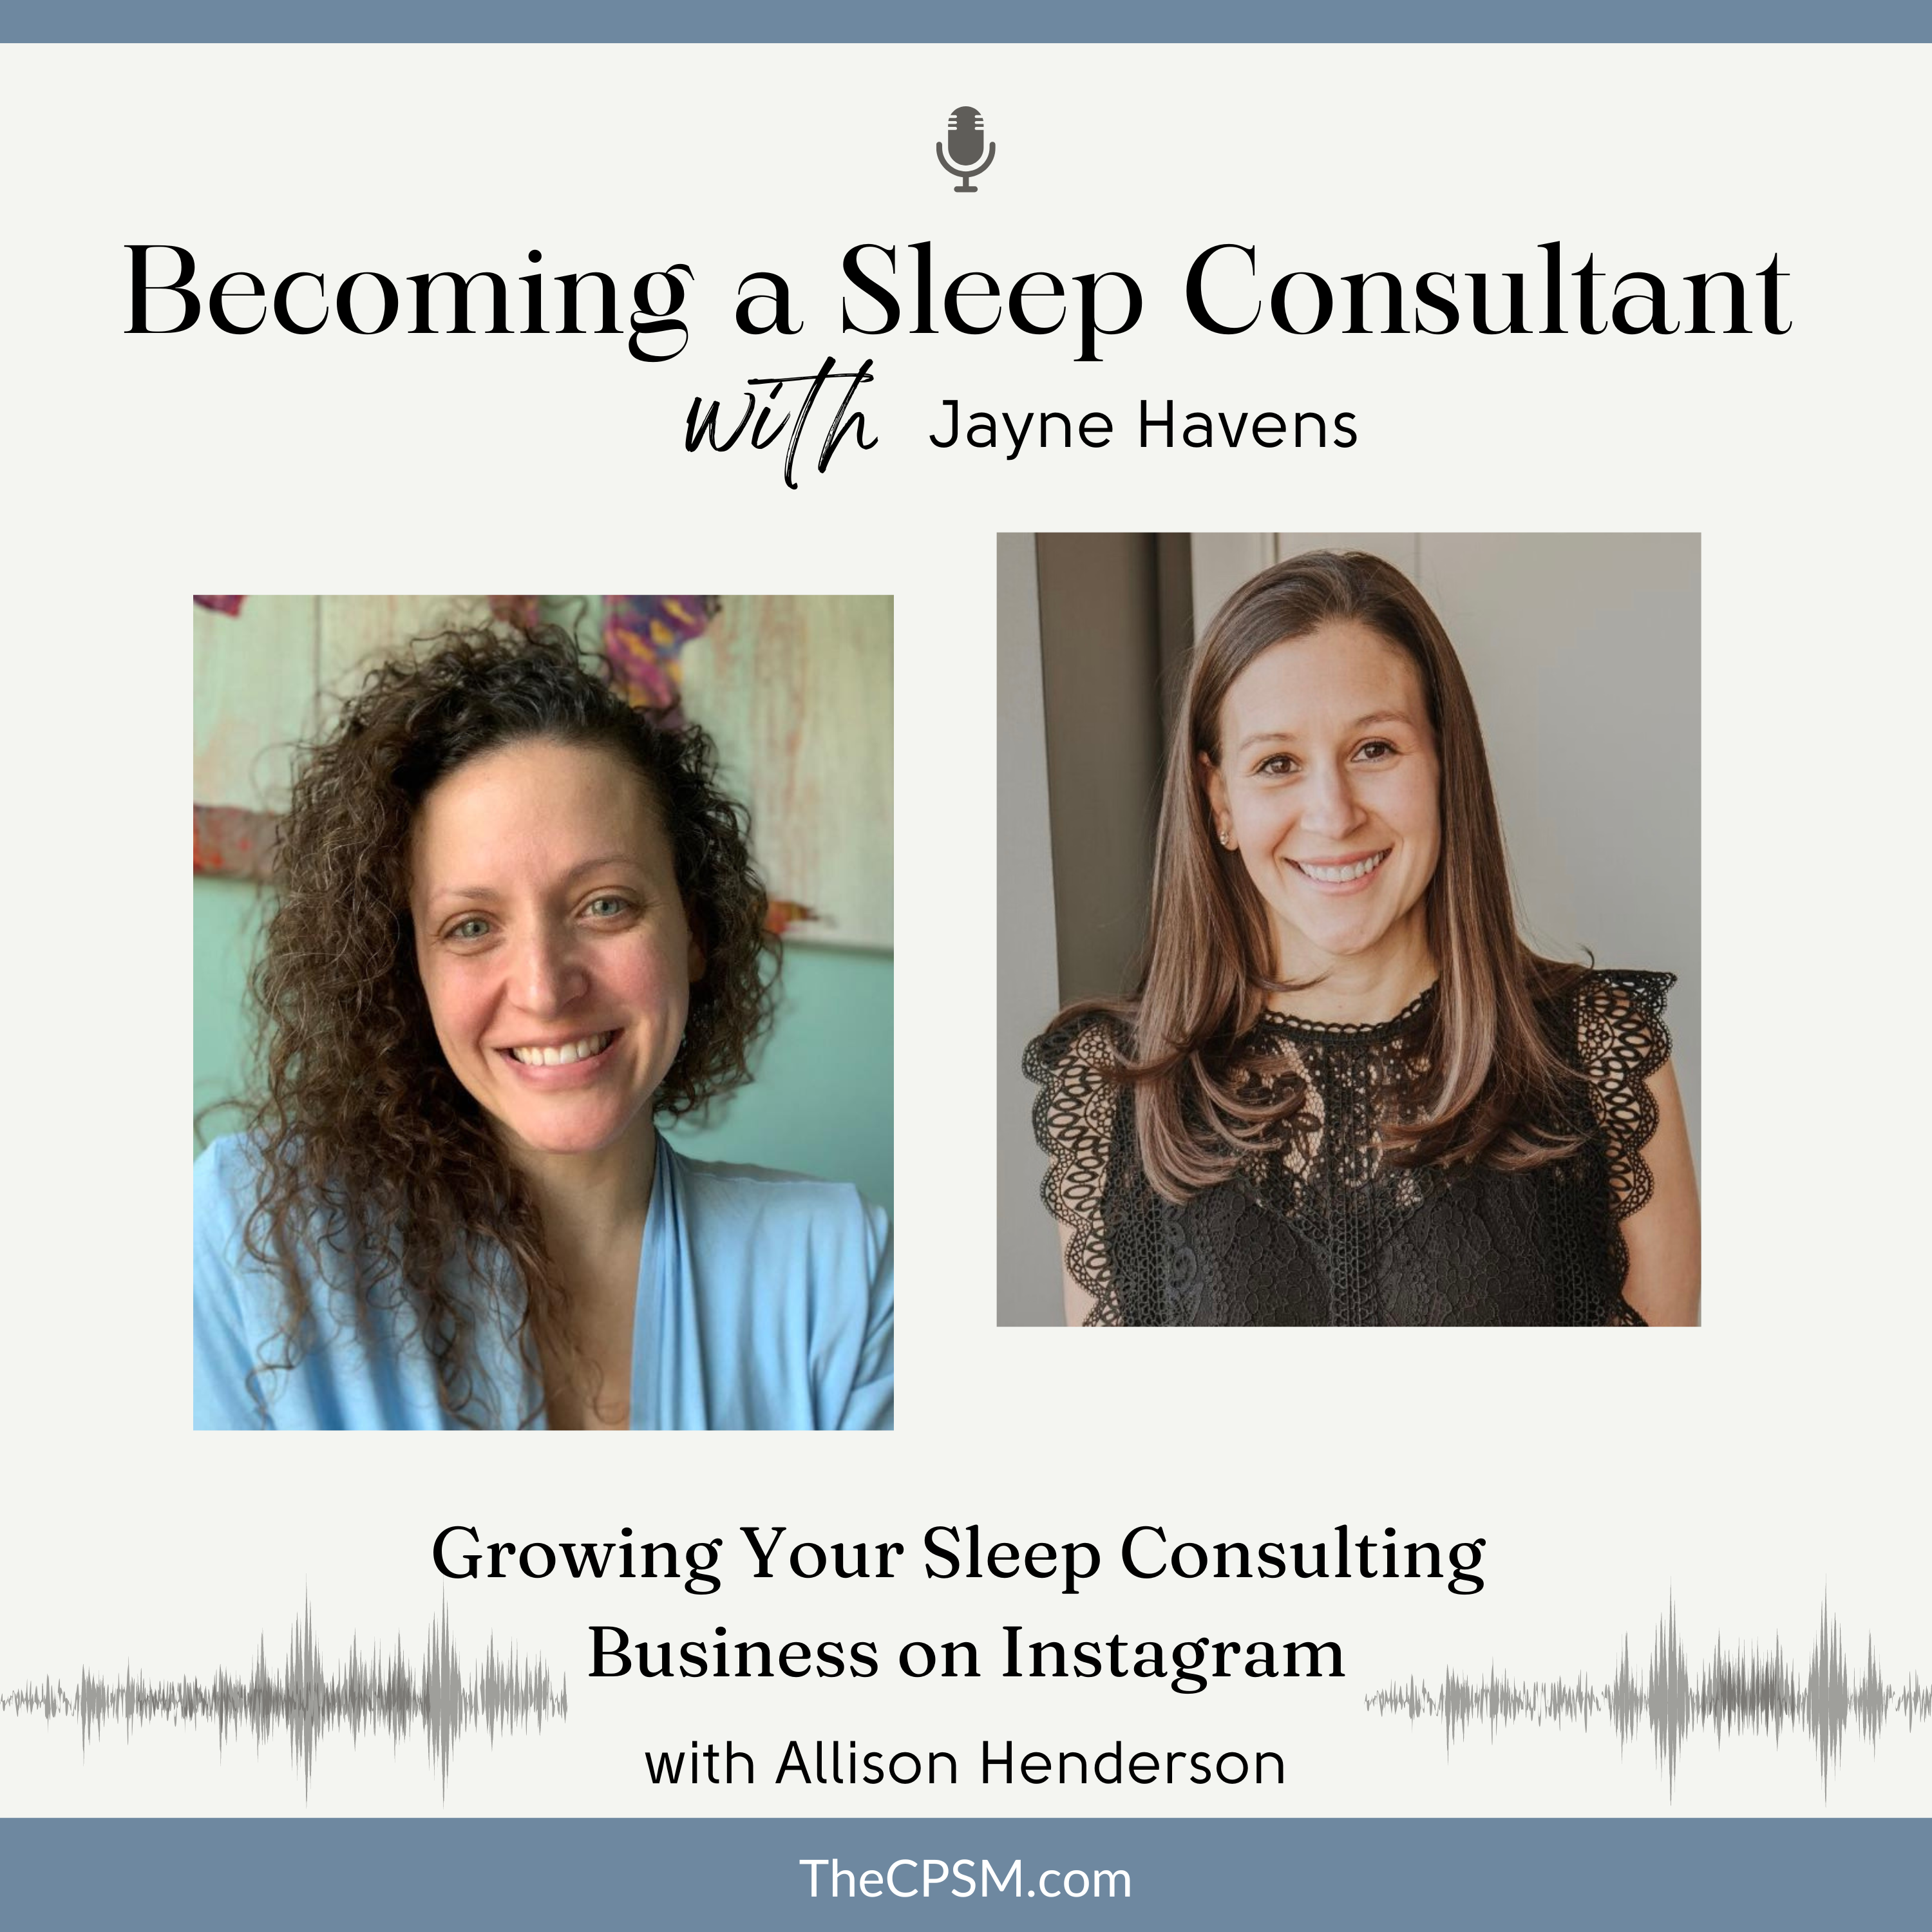 Growing Sleep Consulting Business on Instagram with Allison Henderson